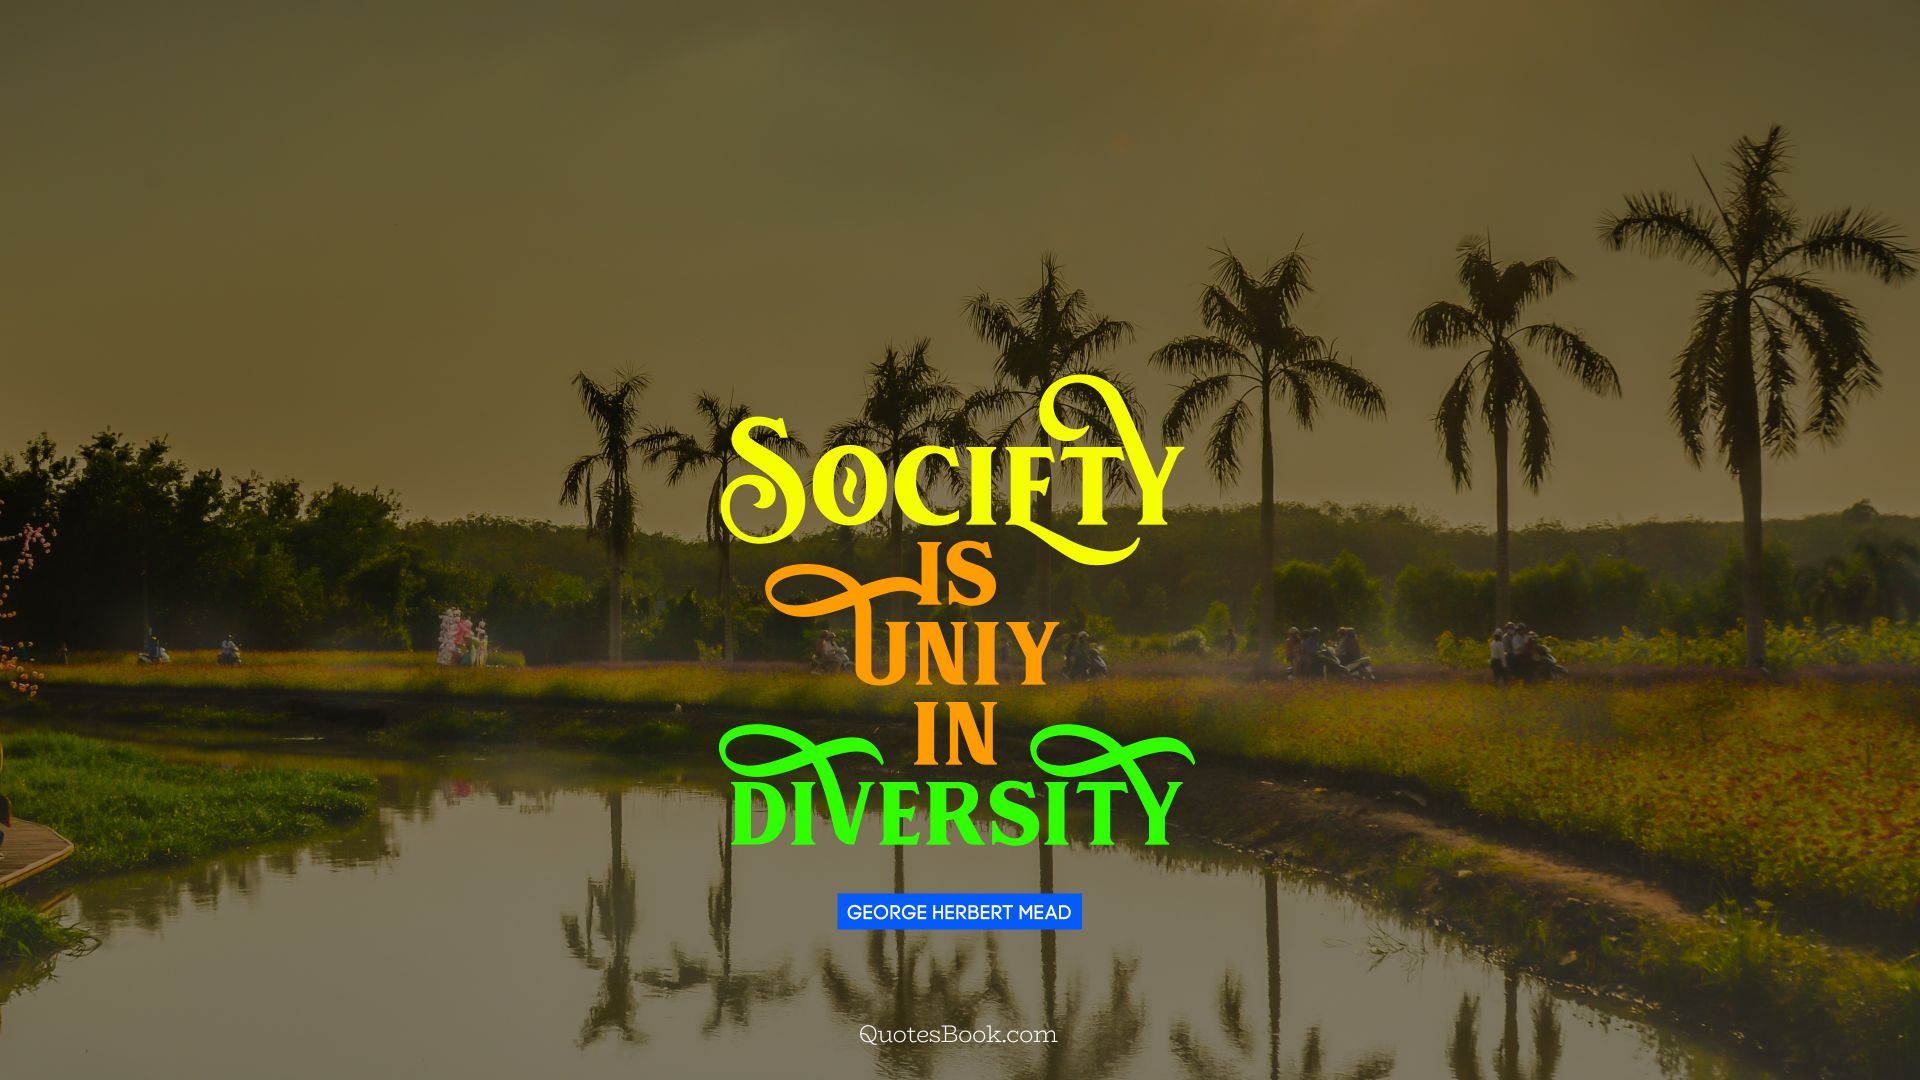 Society is uniy in diversity. - Quote by George Herbert Mead